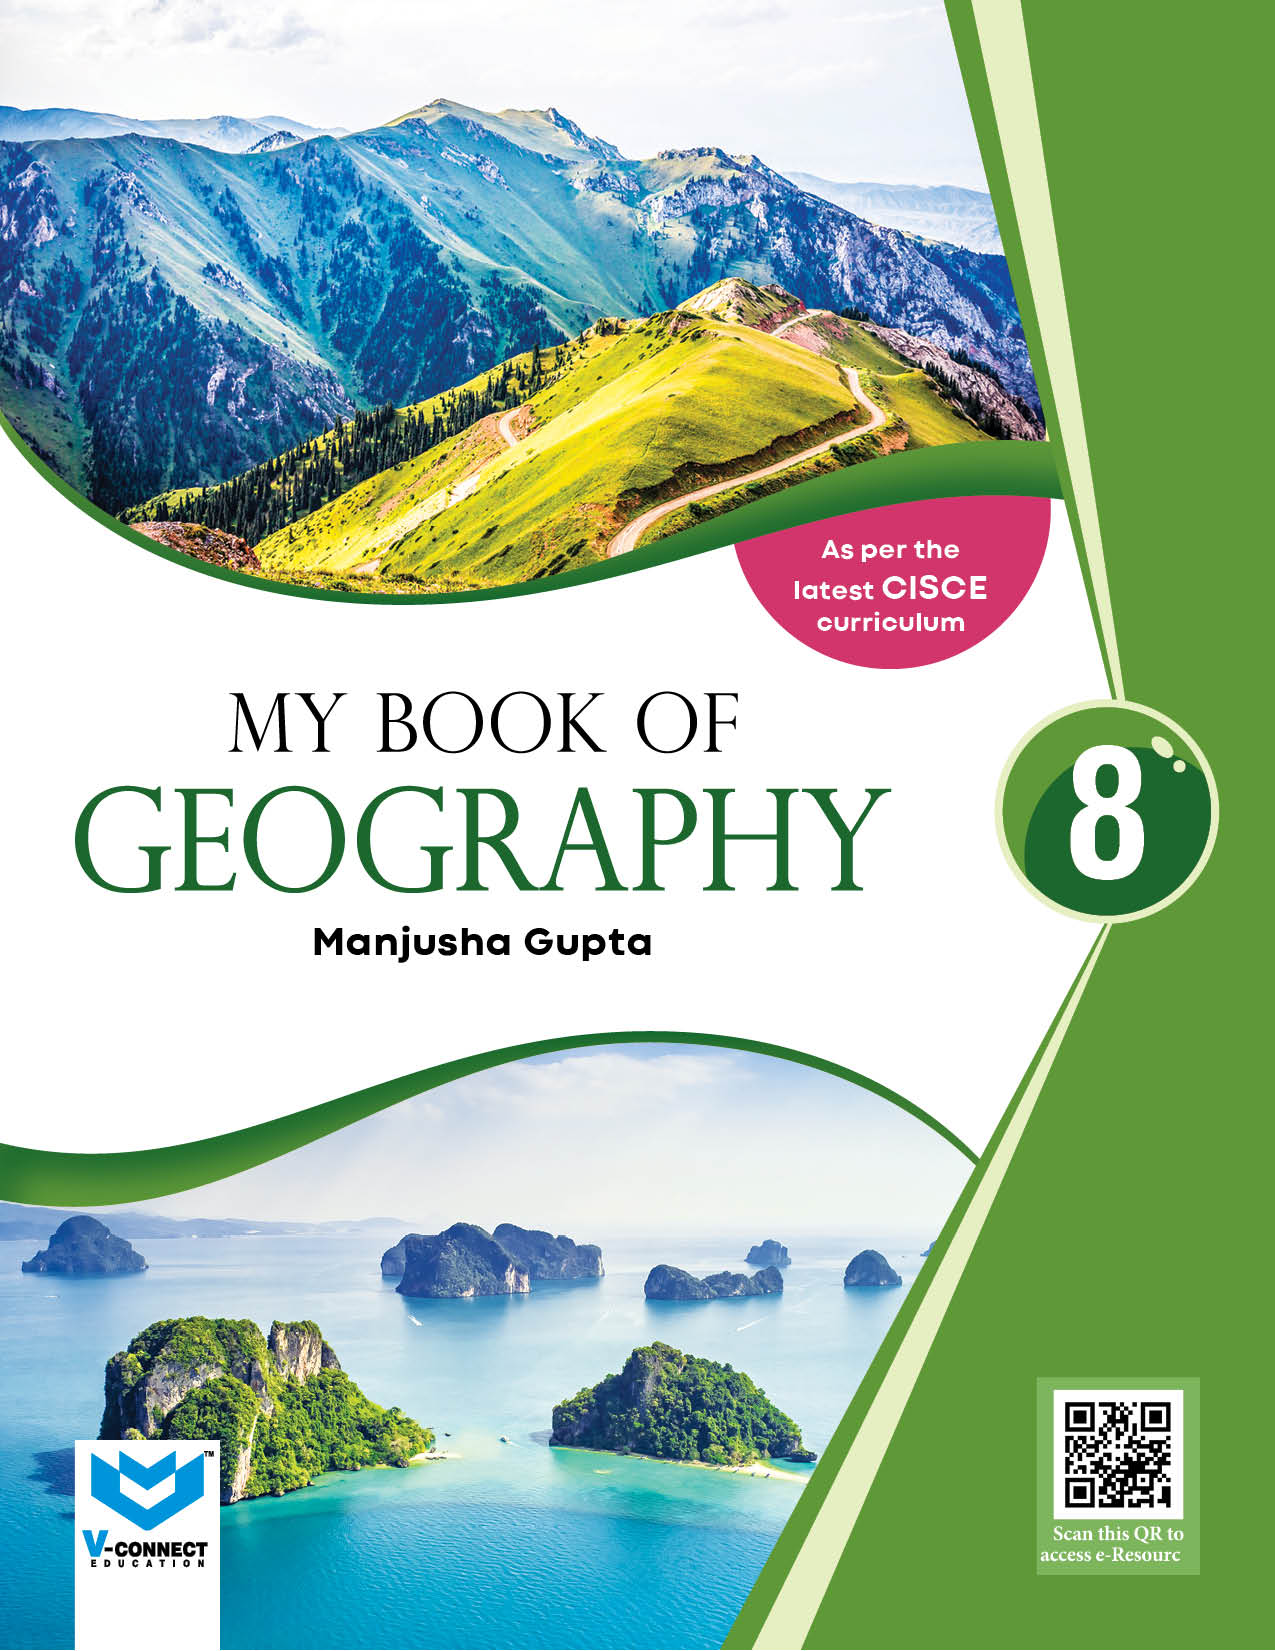 My Book of Geography-8